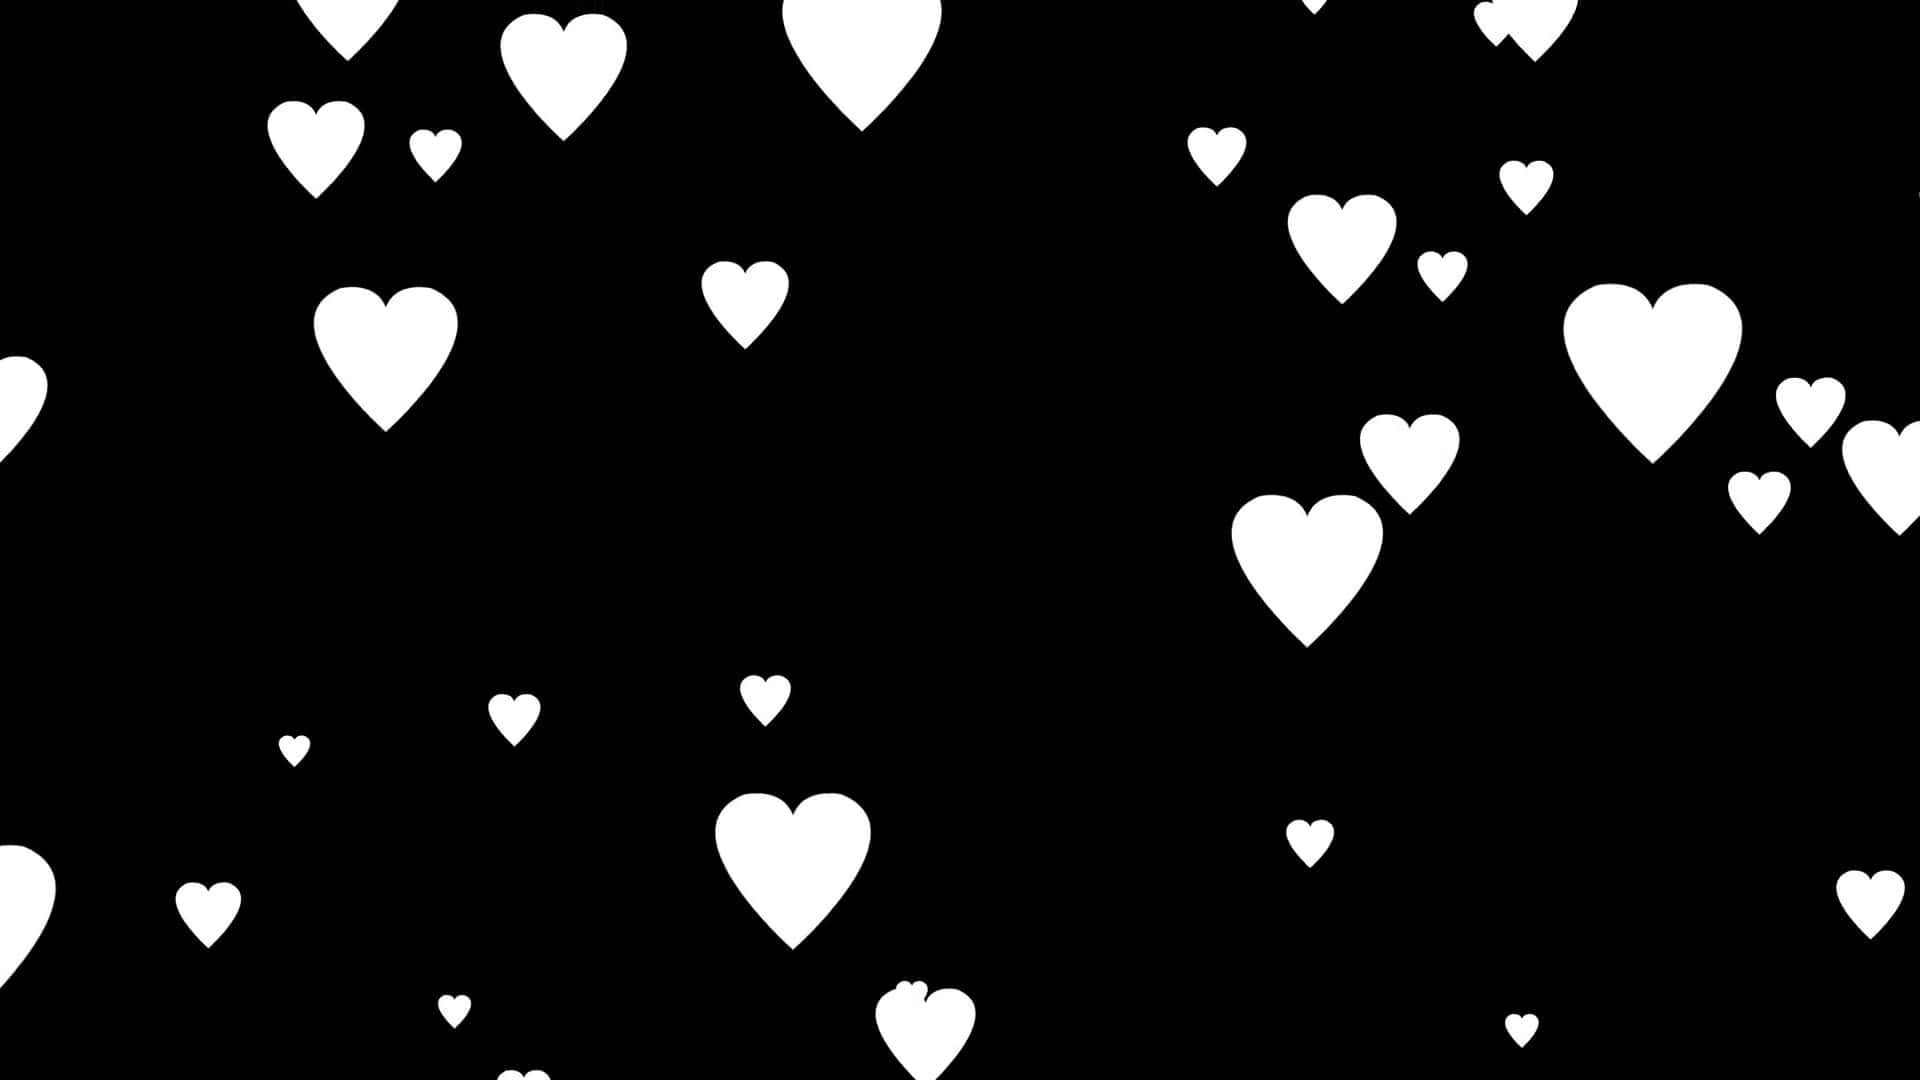 Monochrome Heart on a Textured Background